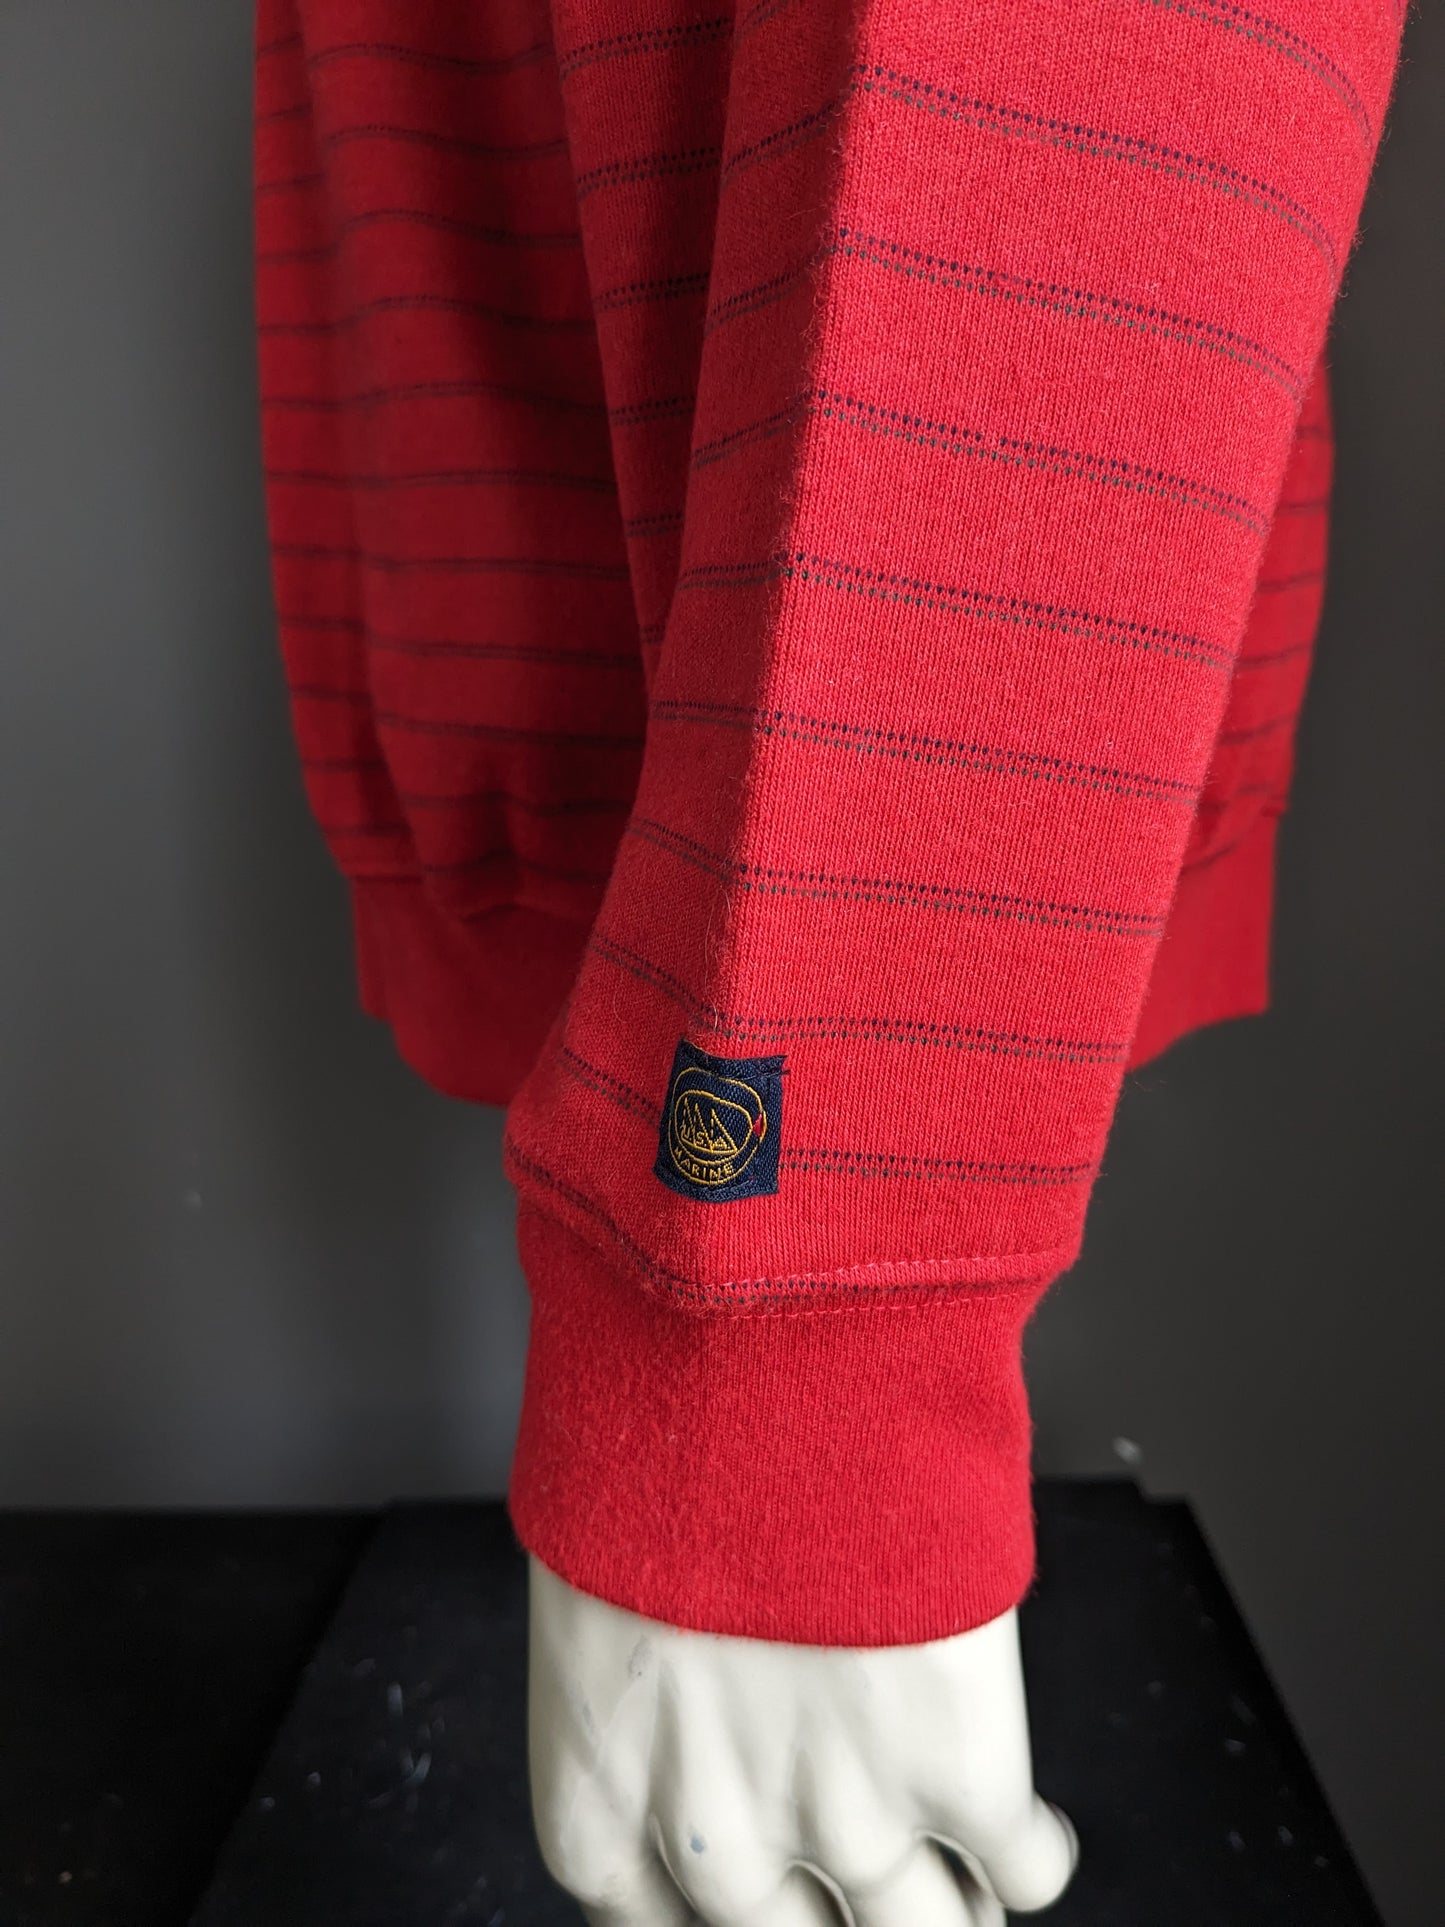 USA Marine Vintage Polo Sweater. Red blue green striped. Size XL.